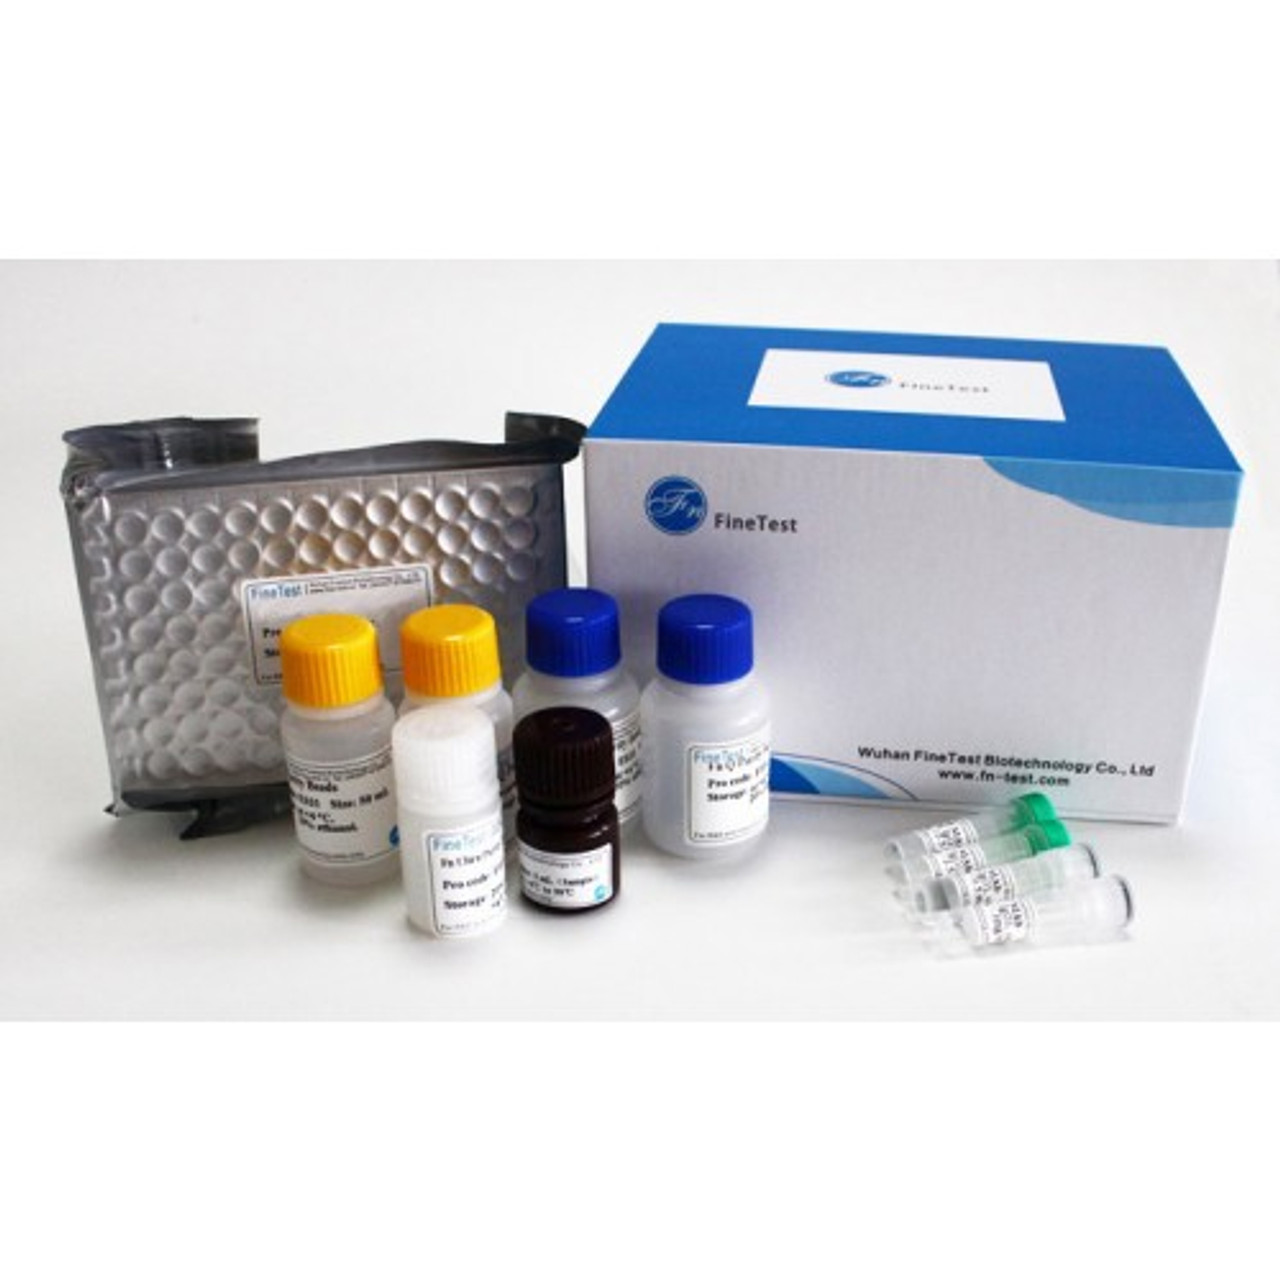 Sheep T-cell surface glycoprotein CD4(T-cell surface glycoprotein CD4) ELISA Kit